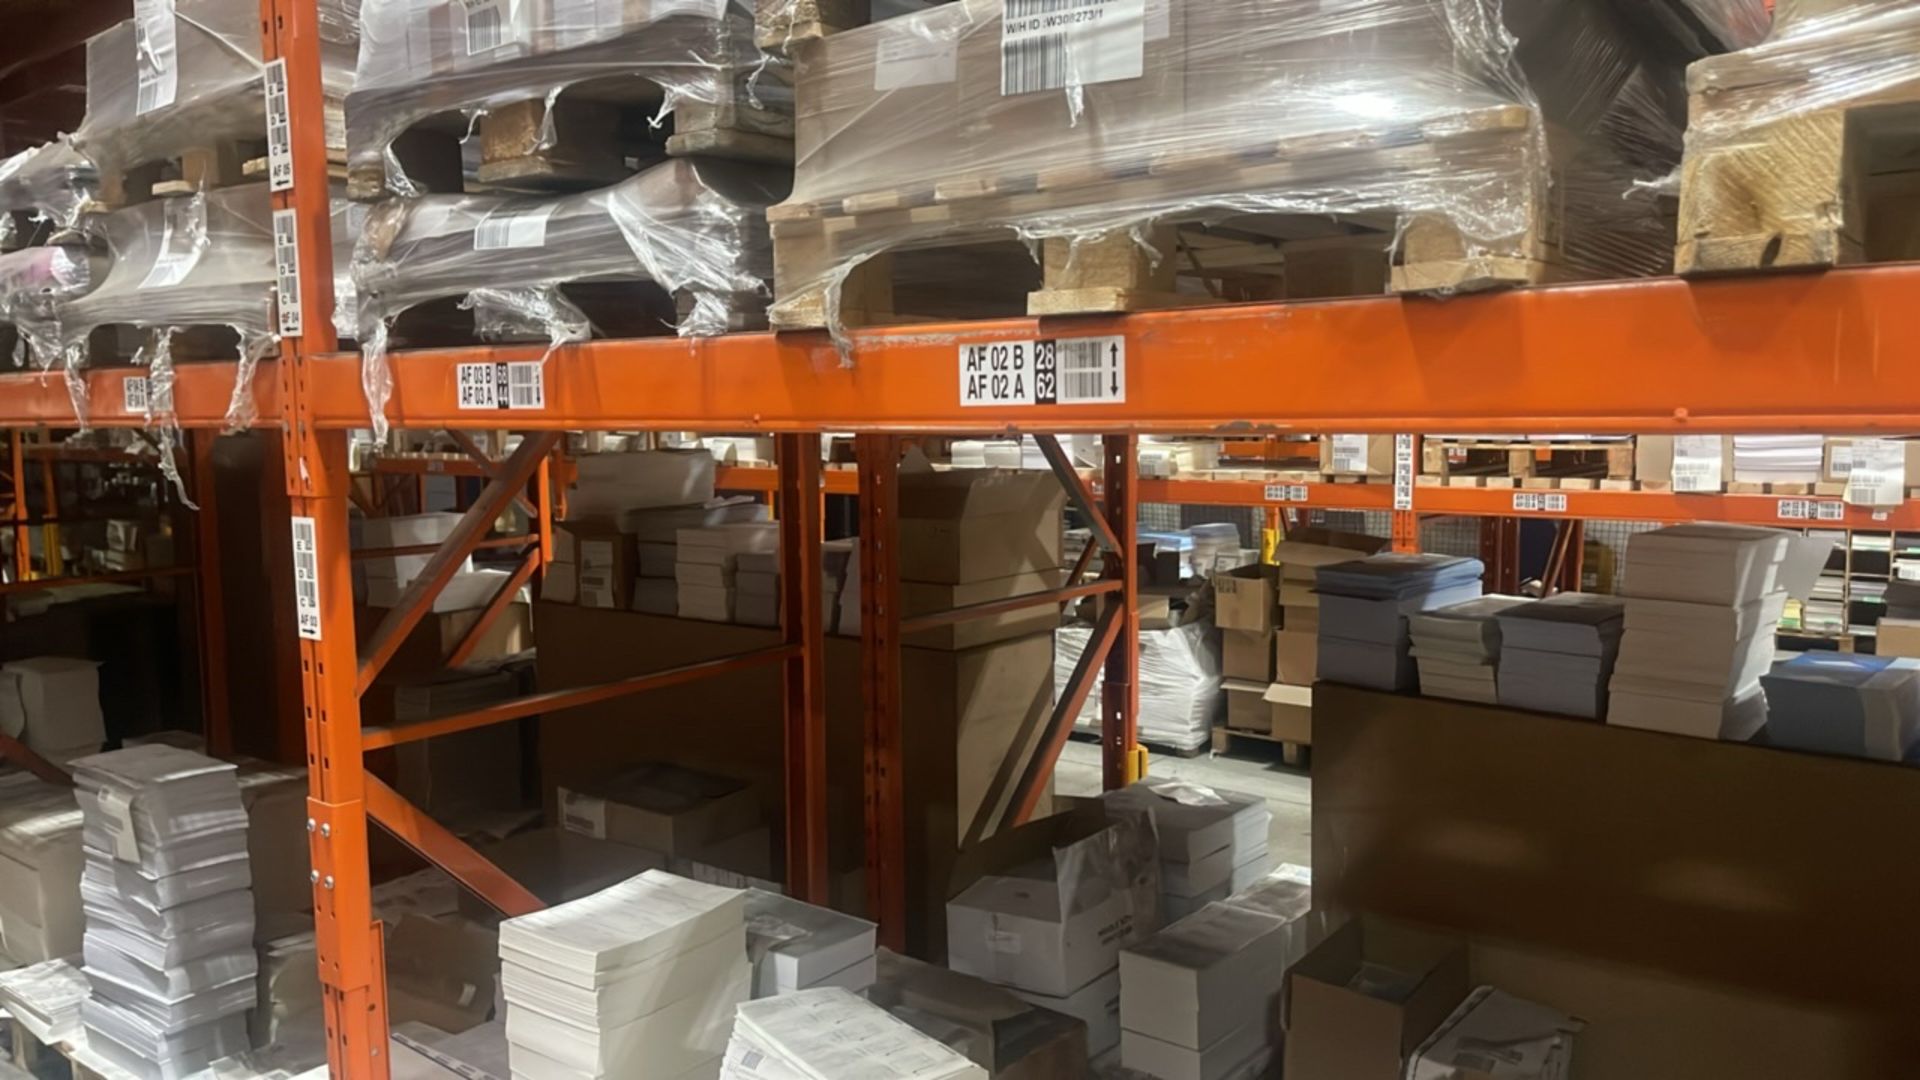 ref 4 - 23 Bays Of Boltless Pallet Racking - Image 8 of 9